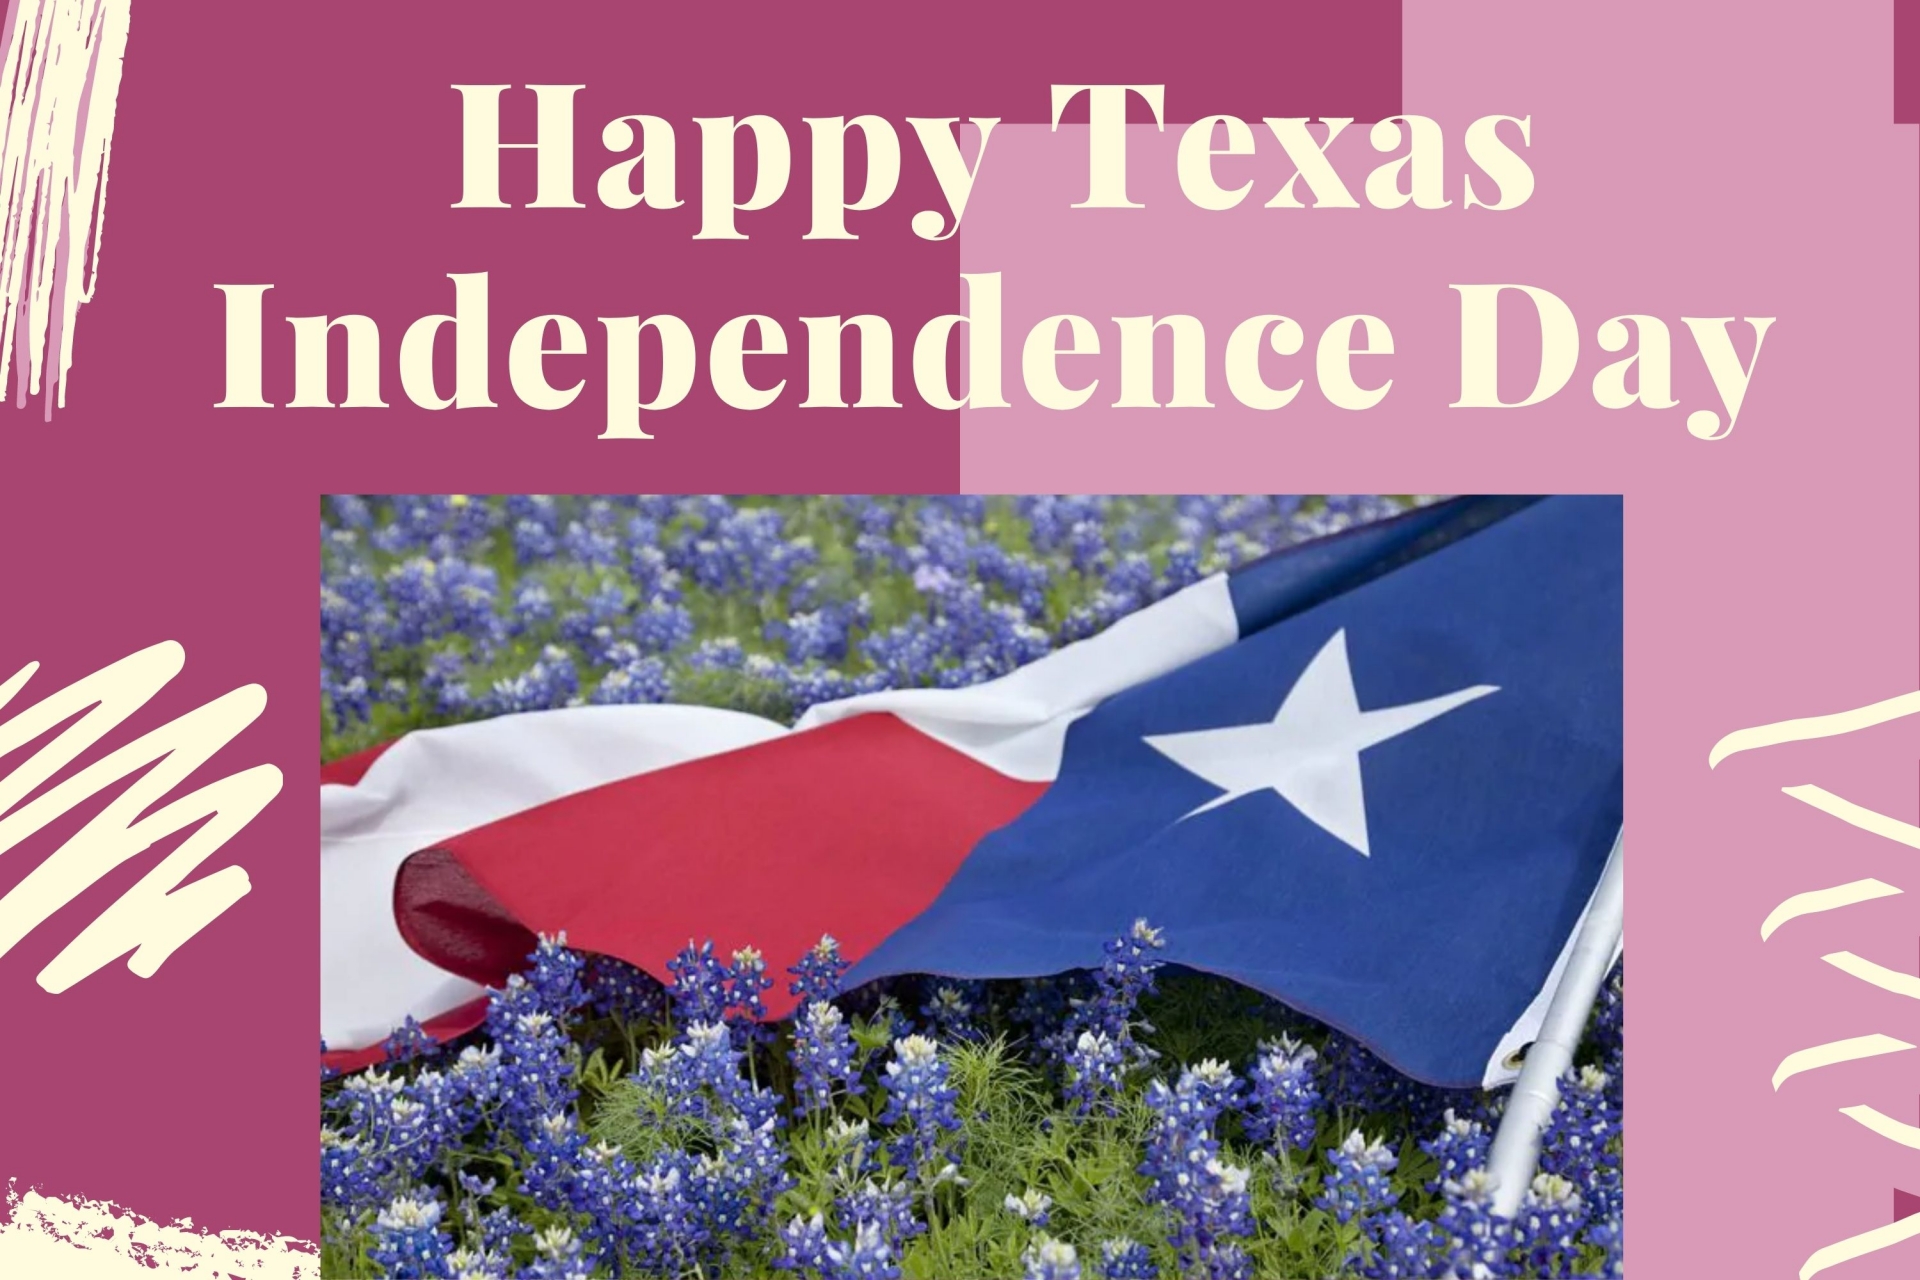 Texas Independence Day (March 2): History, Celebration